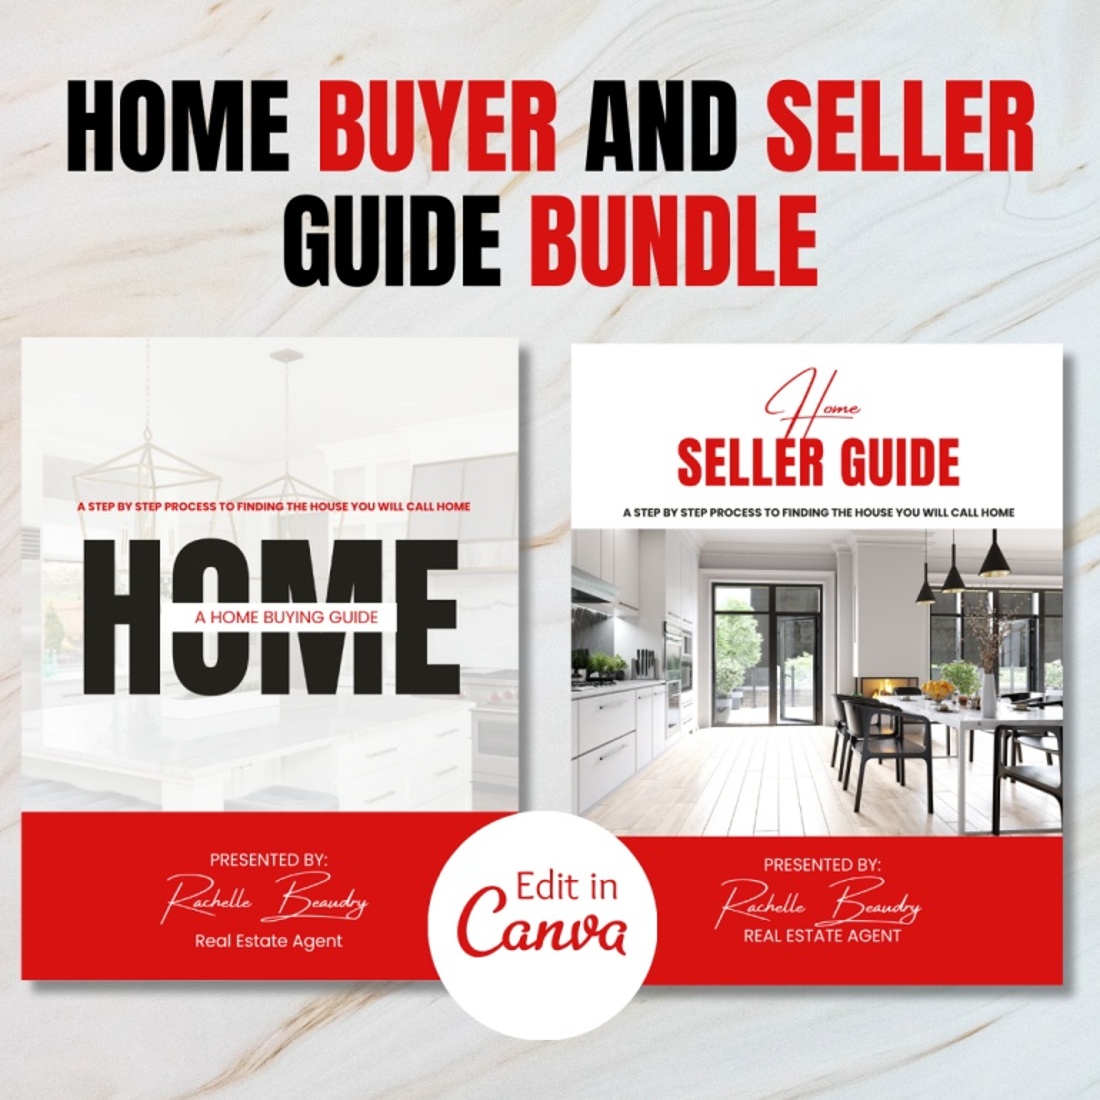 Real Estate Seller Guide & Home Buyer Guide Bundle | Real Estate Marketing | Home Seller Guide | CMA Packet | Listing Presentation | Canva | Fall Presentation canva cover image.